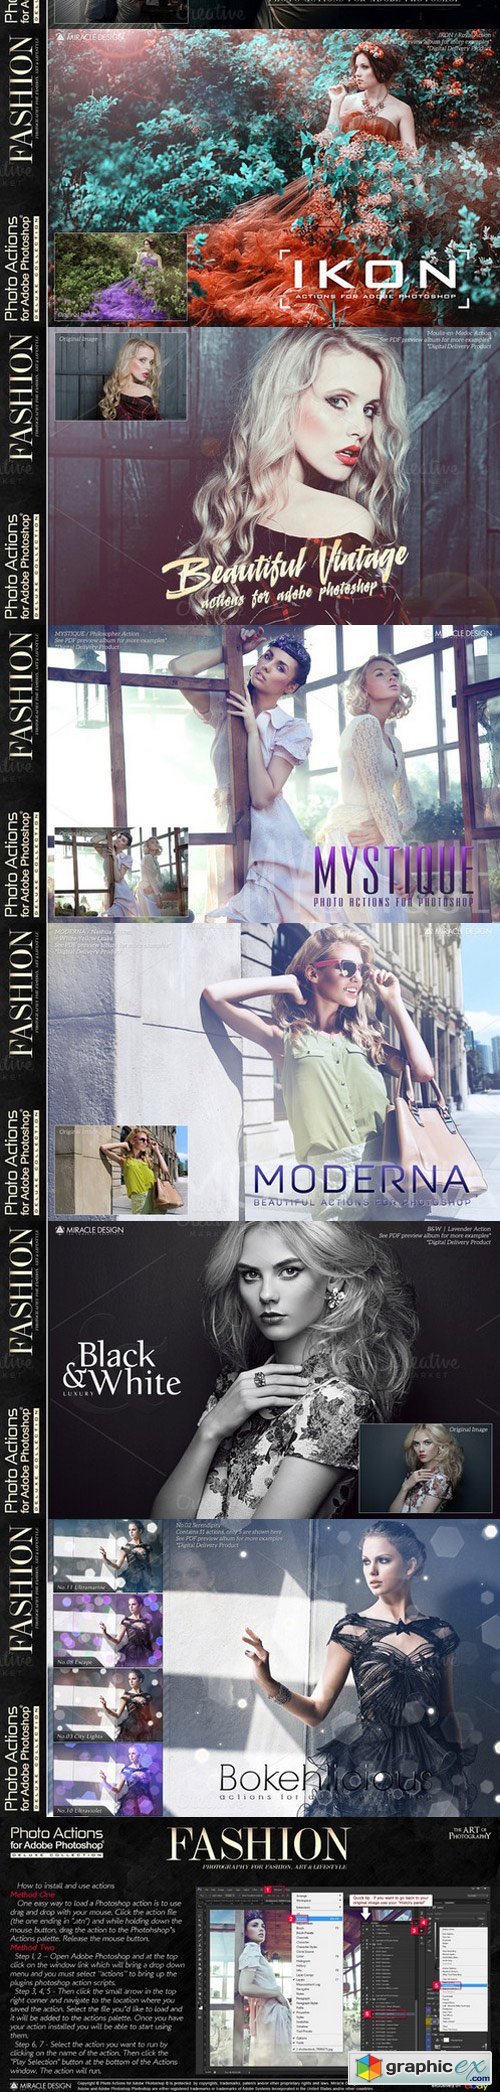 Actions for Photoshop / Fashion 886815